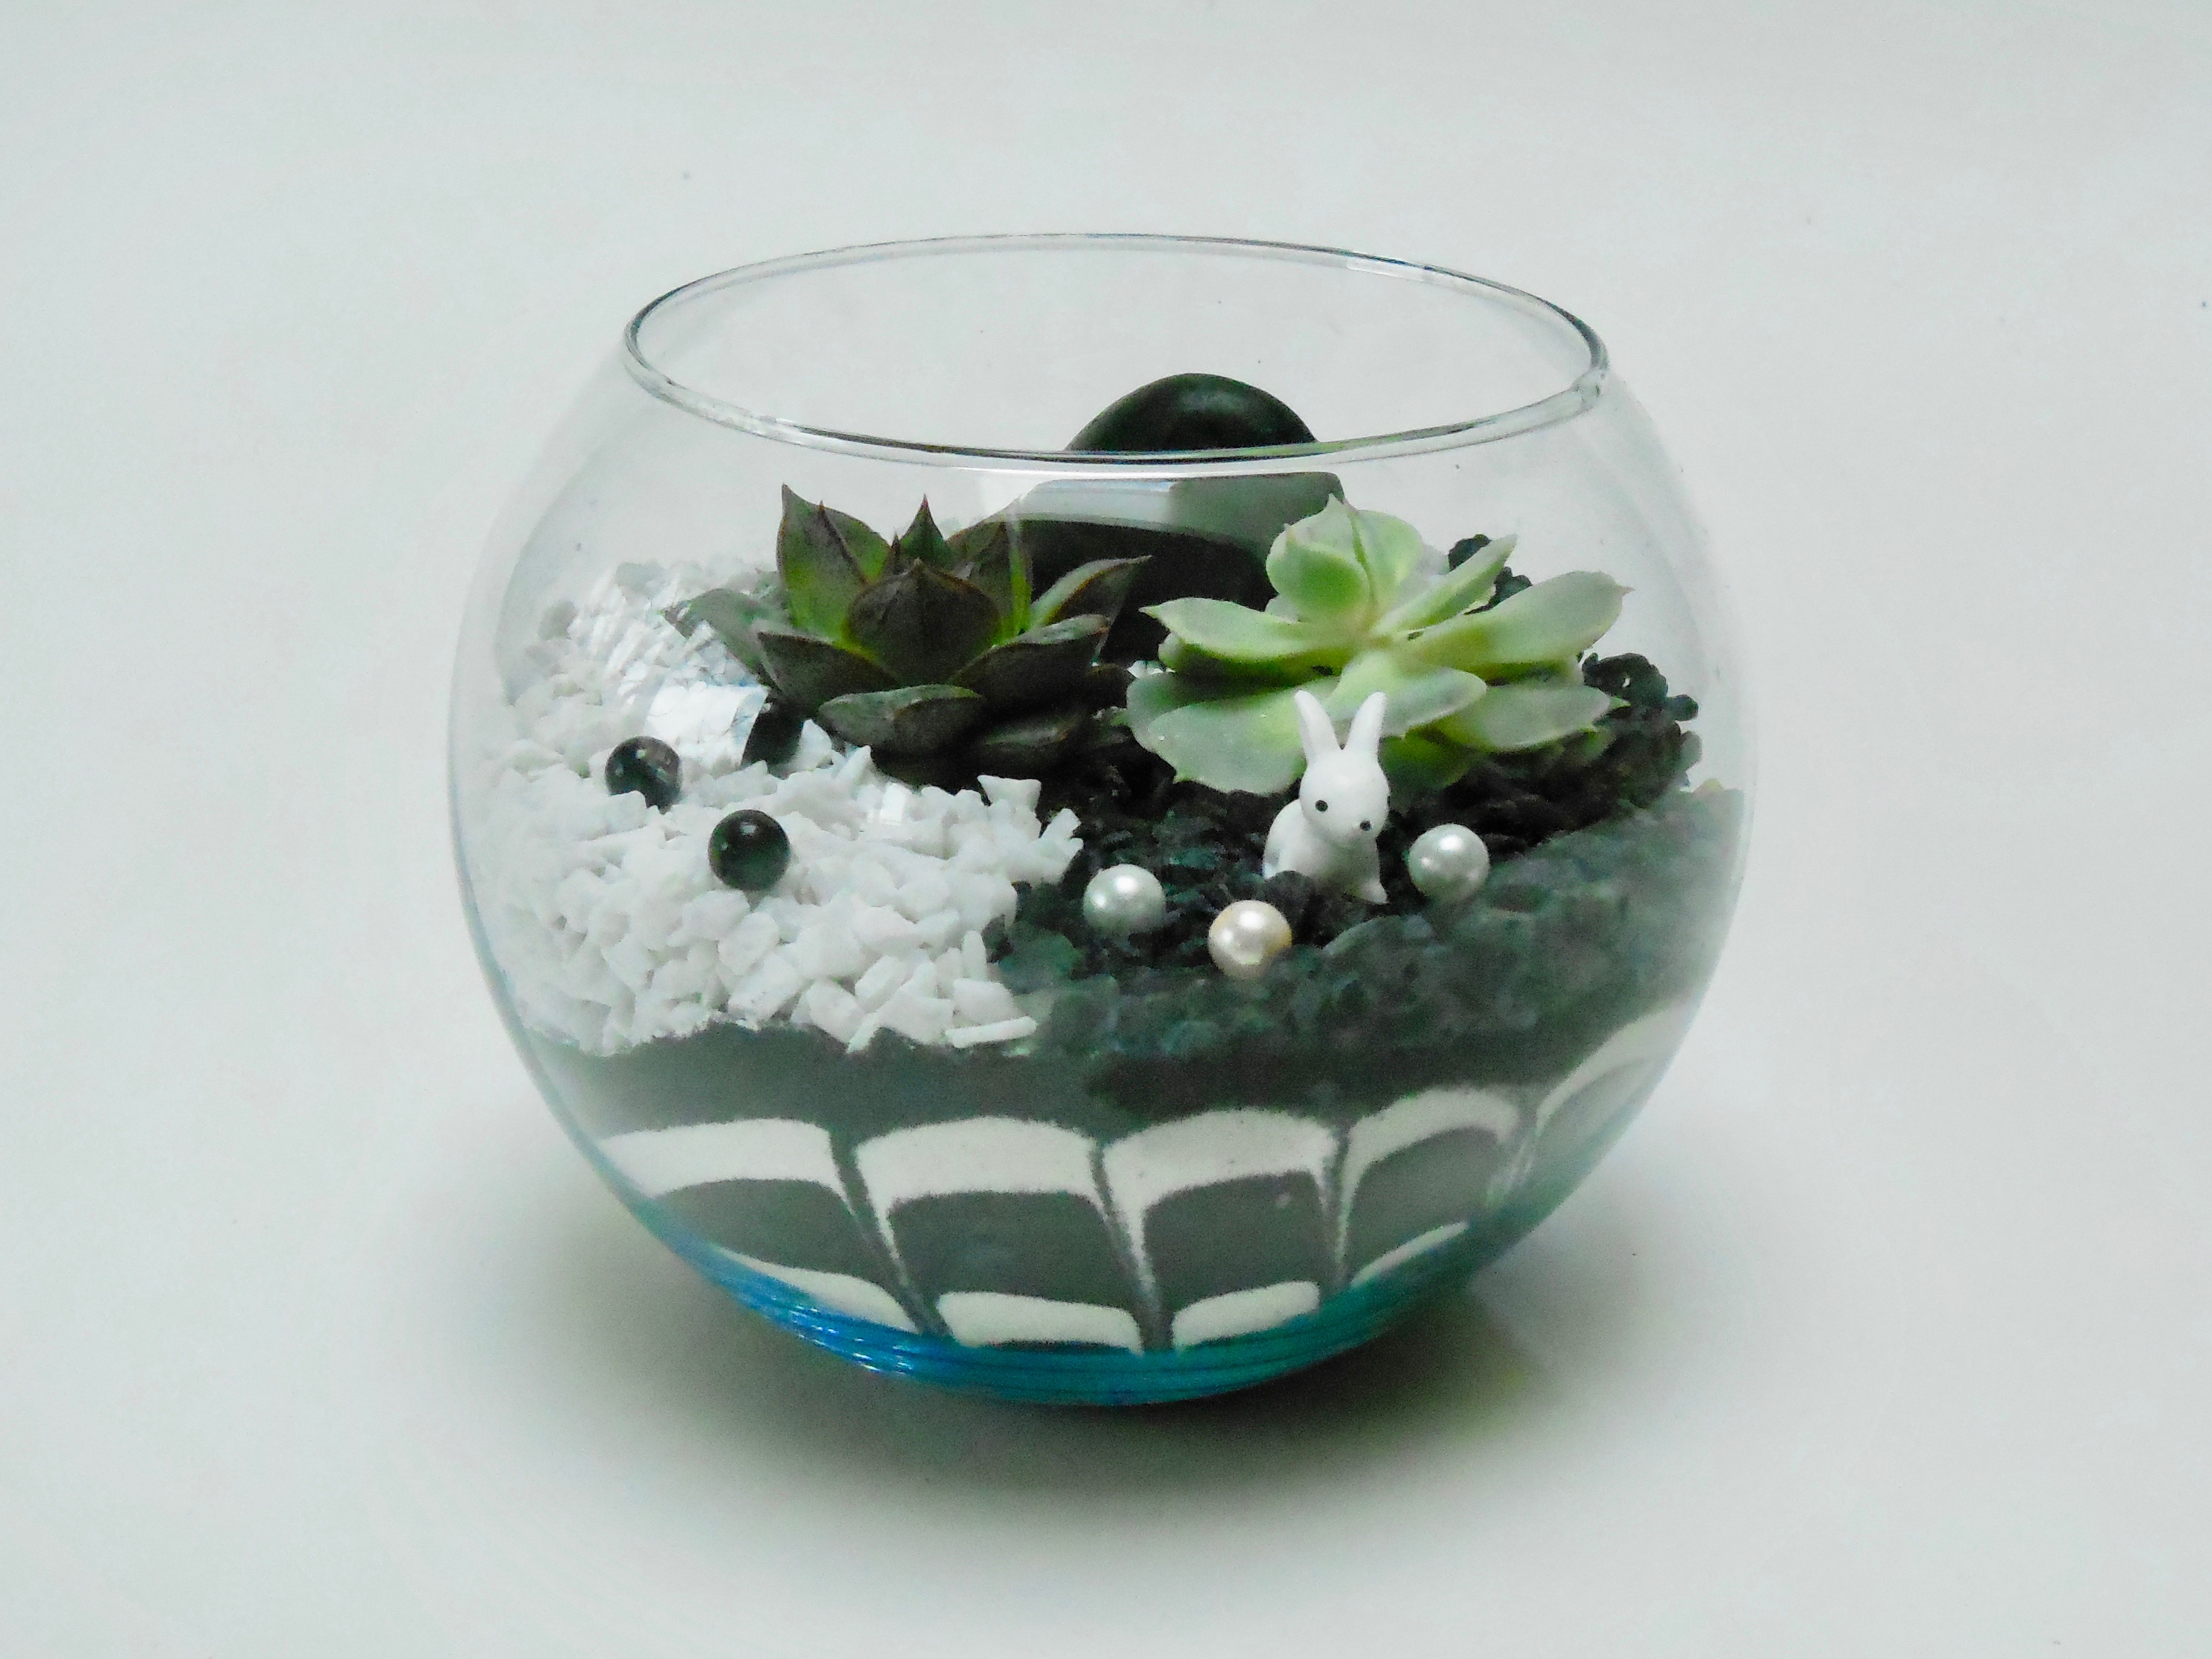 A Yin Yang Bunny  Succulent Sand Art Rose Bowl plant nite project by Yaymaker